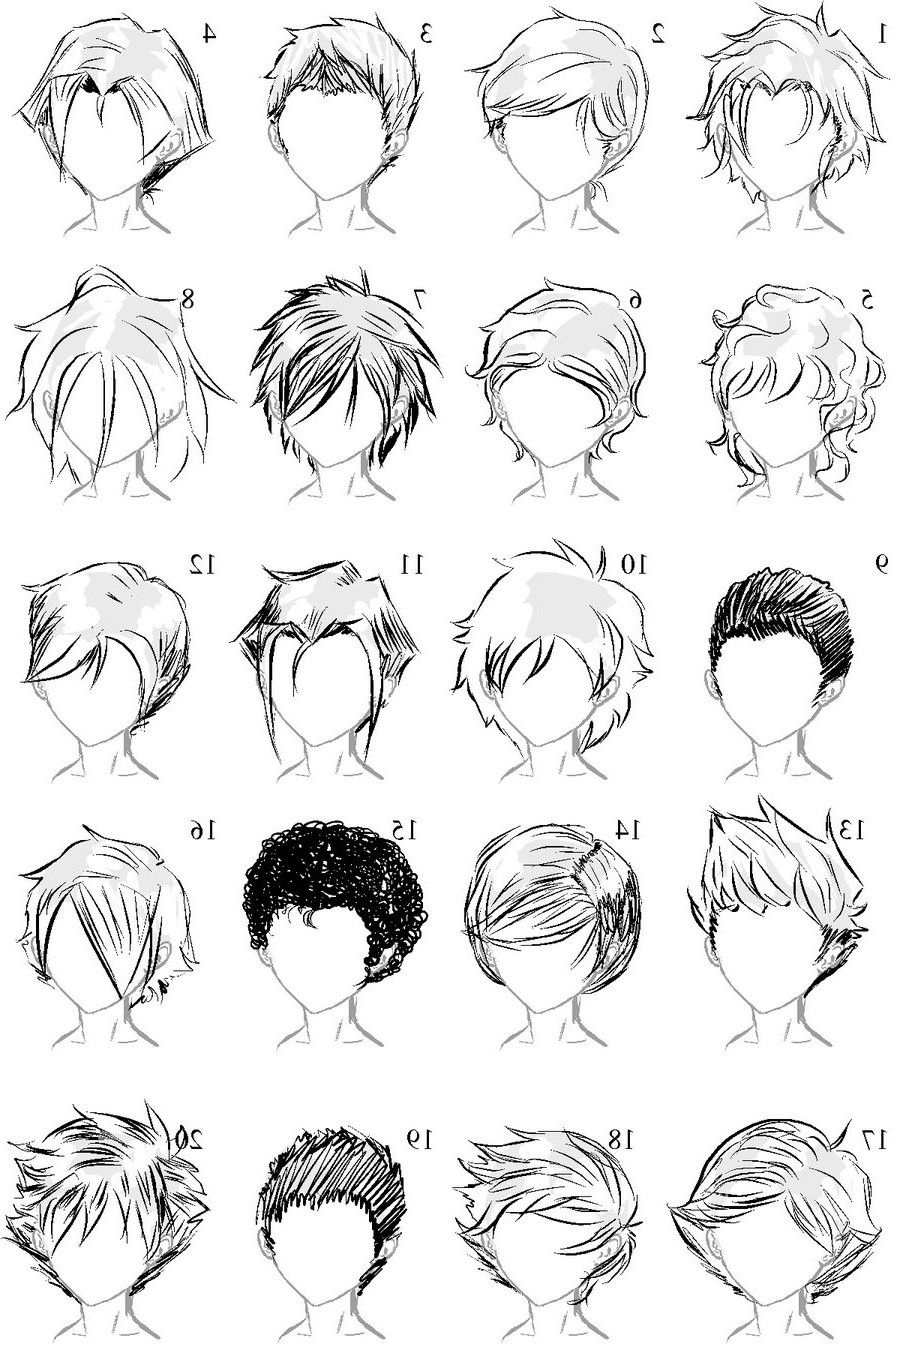 Boy Anime Hairstyles
 Male Anime Hairstyles Drawing at PaintingValley